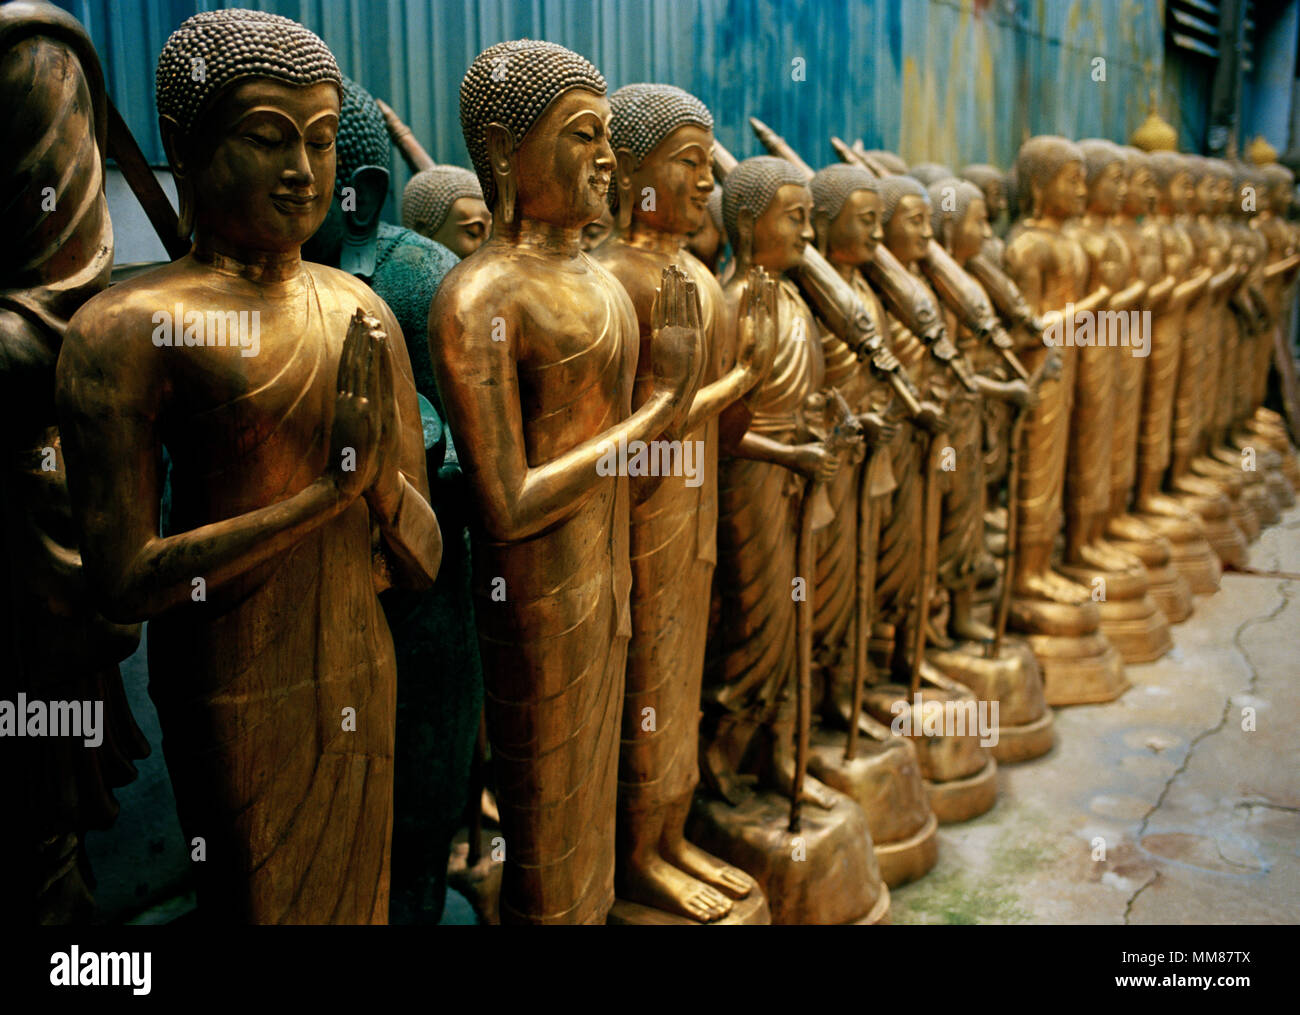 Thai Buddhism - Buddha statue art for sale in Bamrung Muang Road in Bangkok in Thailand in Southeast Asia Far East. Serenity Serene Buddhist Travel Stock Photo